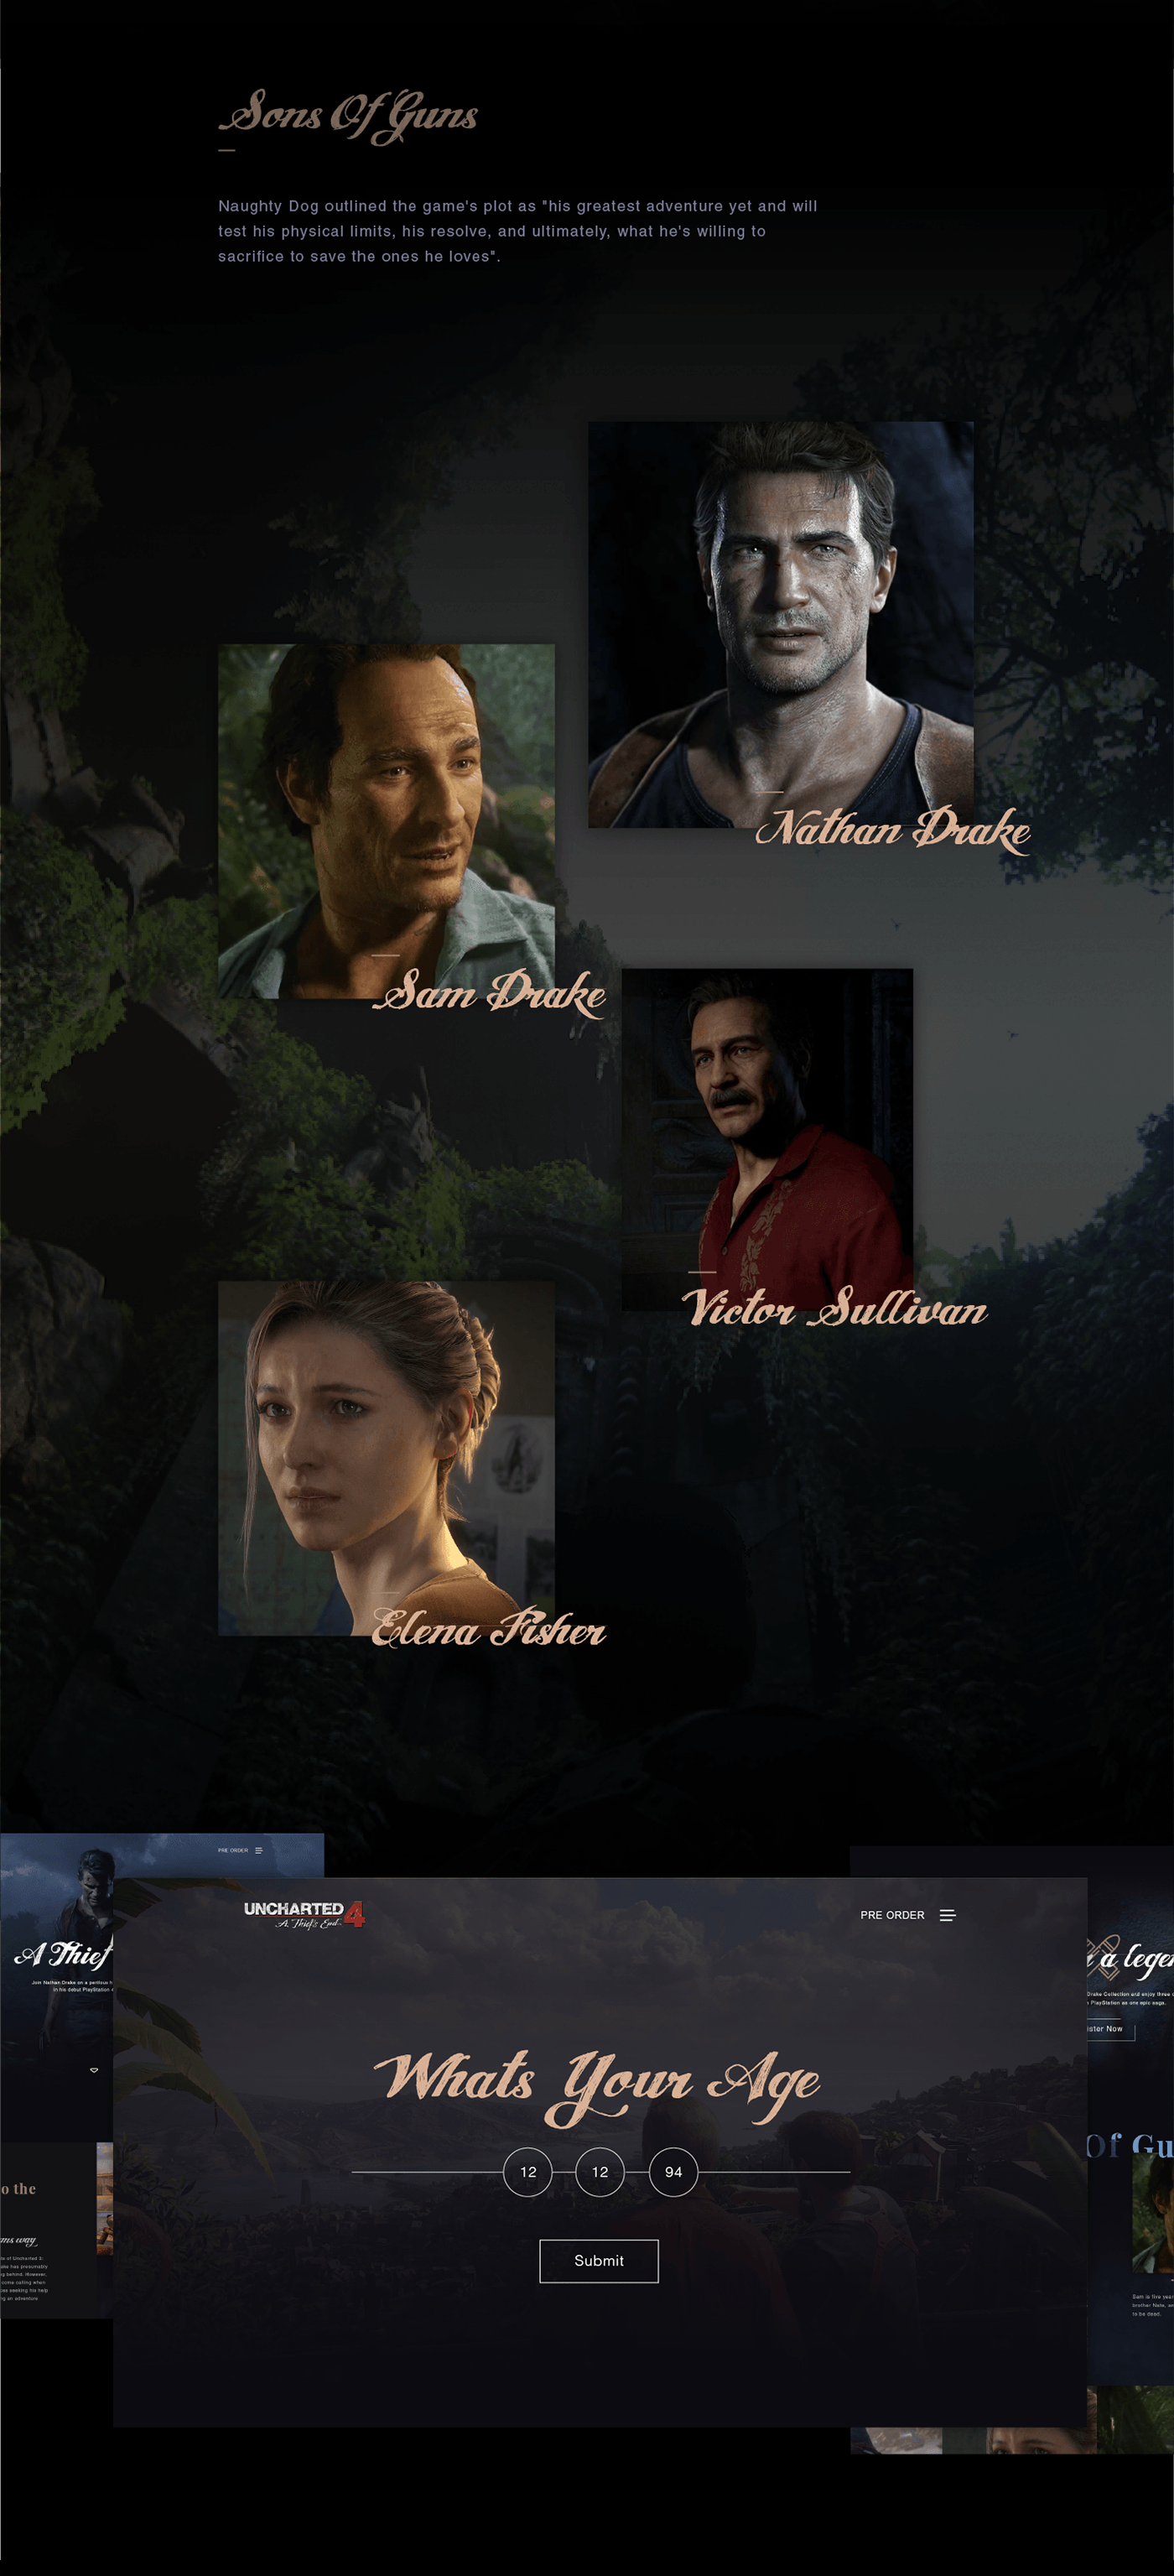 Adobe Portfolio Uncharted 4 Uncharted 4: A Thief's End A Thief's End naughty dog playstation 4 Sony Gaming Games Web action adventure